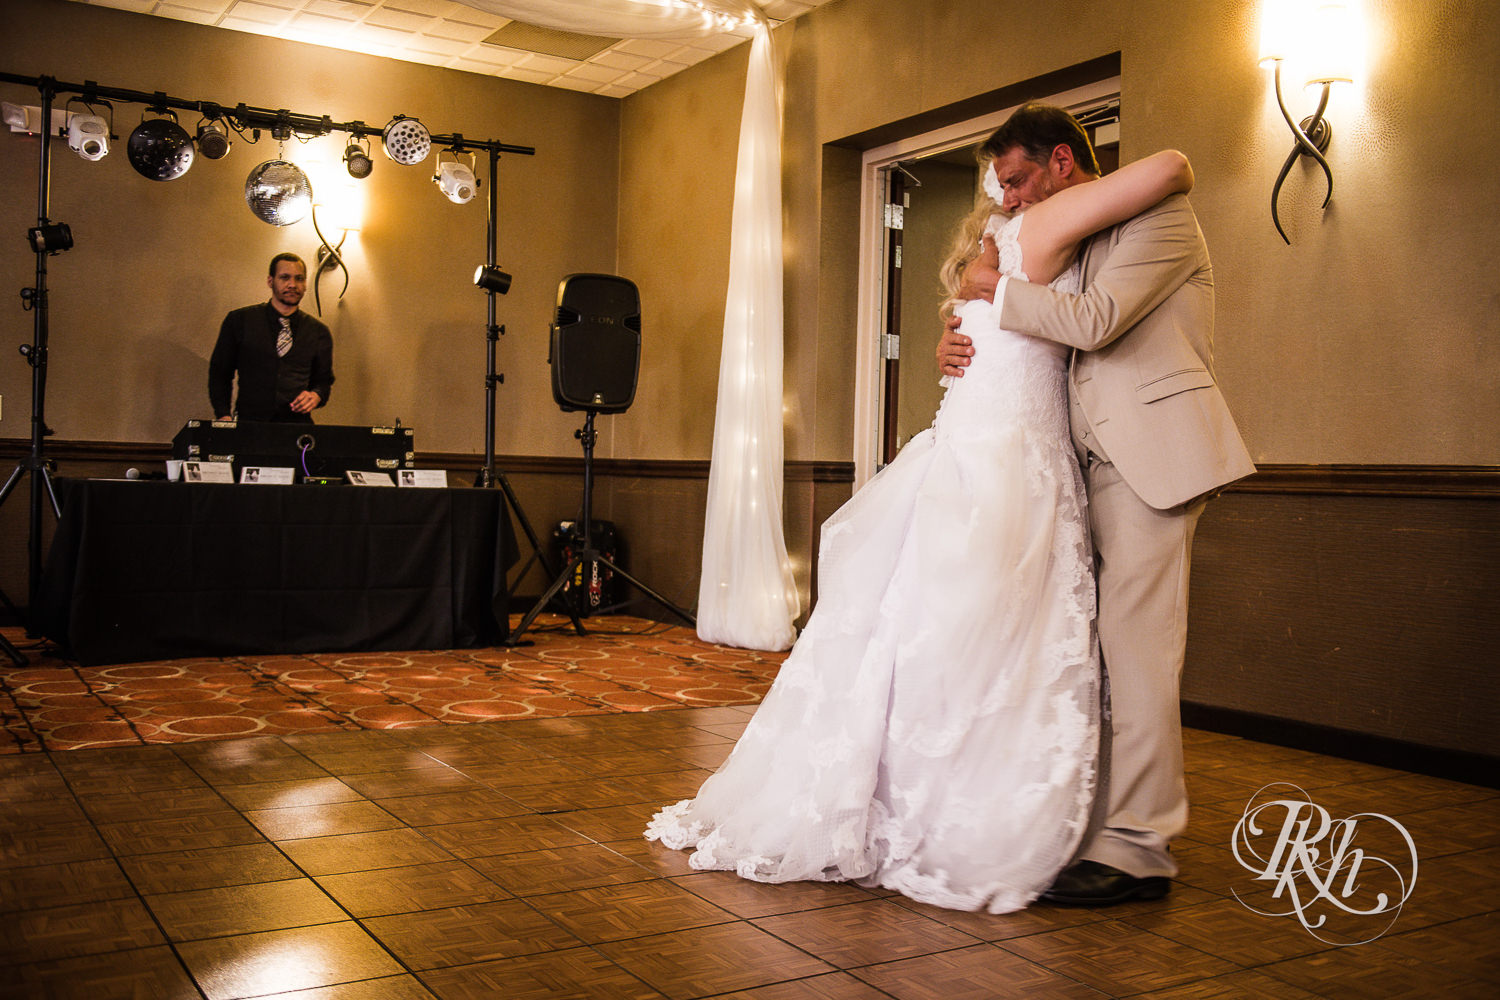 Father and bride dance during wedding reception at North Metro Event Center in Shoreview, Minnesota.